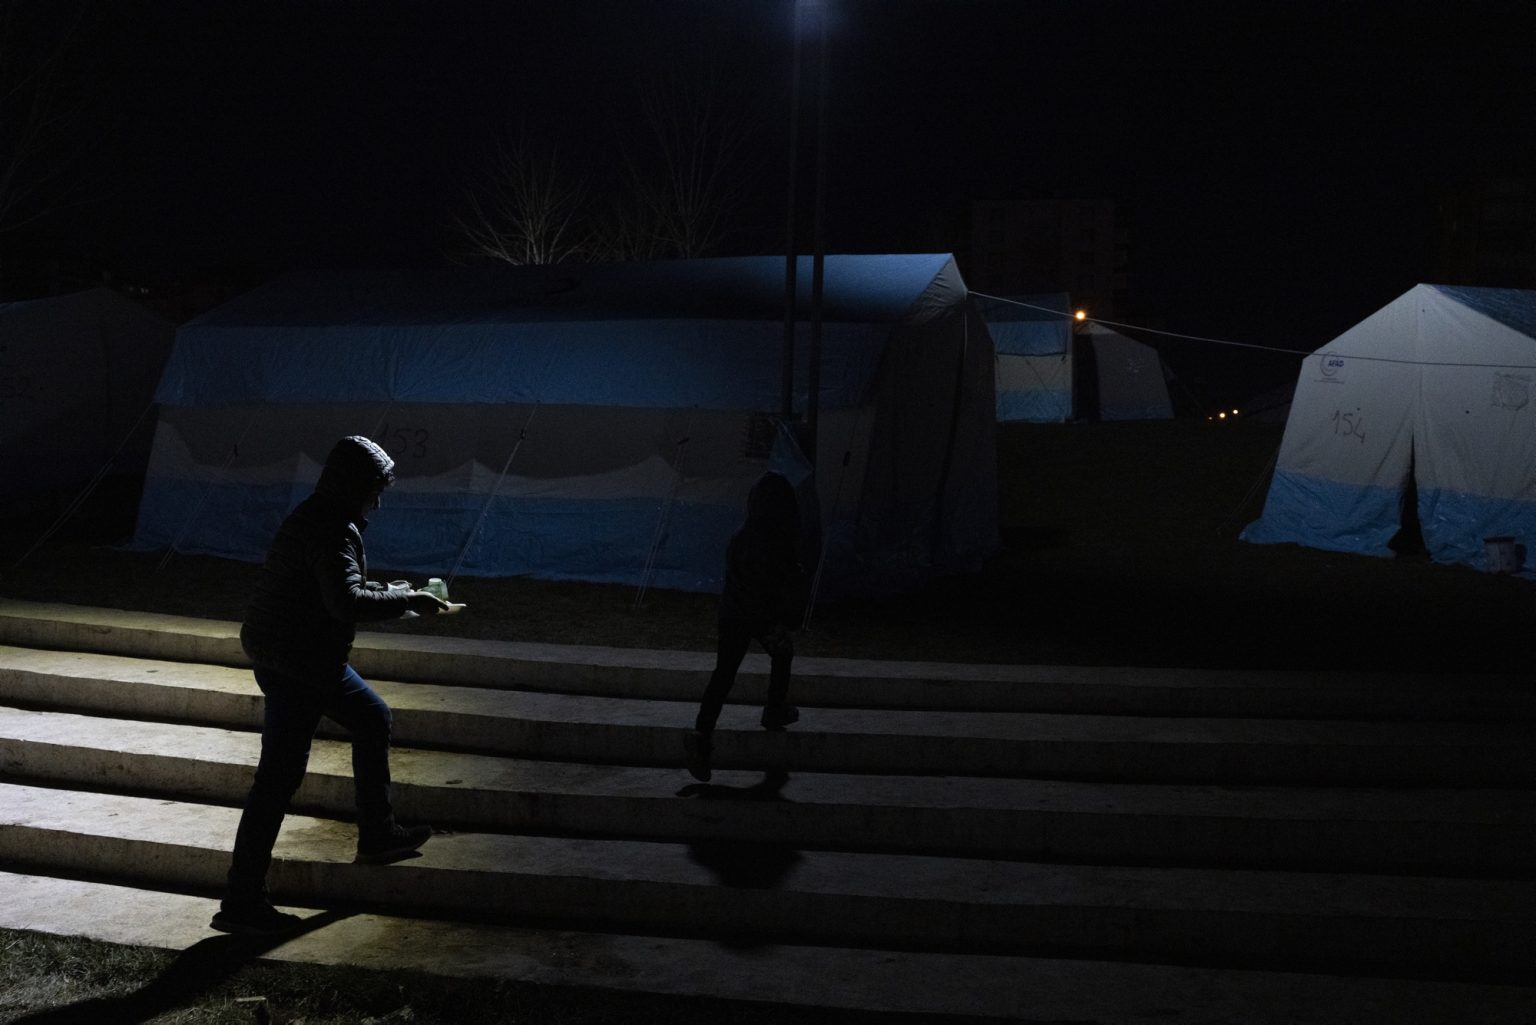 Diyarbakir, Turkey, February 2023 - The aftermath of the earthquake that hit southern Turkey and northern Syria.  A man walks inside a tent camp set up in the city of Diyarbakir. ><
Diyarbakir, Turchia, febbraio 2023  Le conseguenze del terremoto che ha colpito la Turchia del Sud e la Siria del nord.